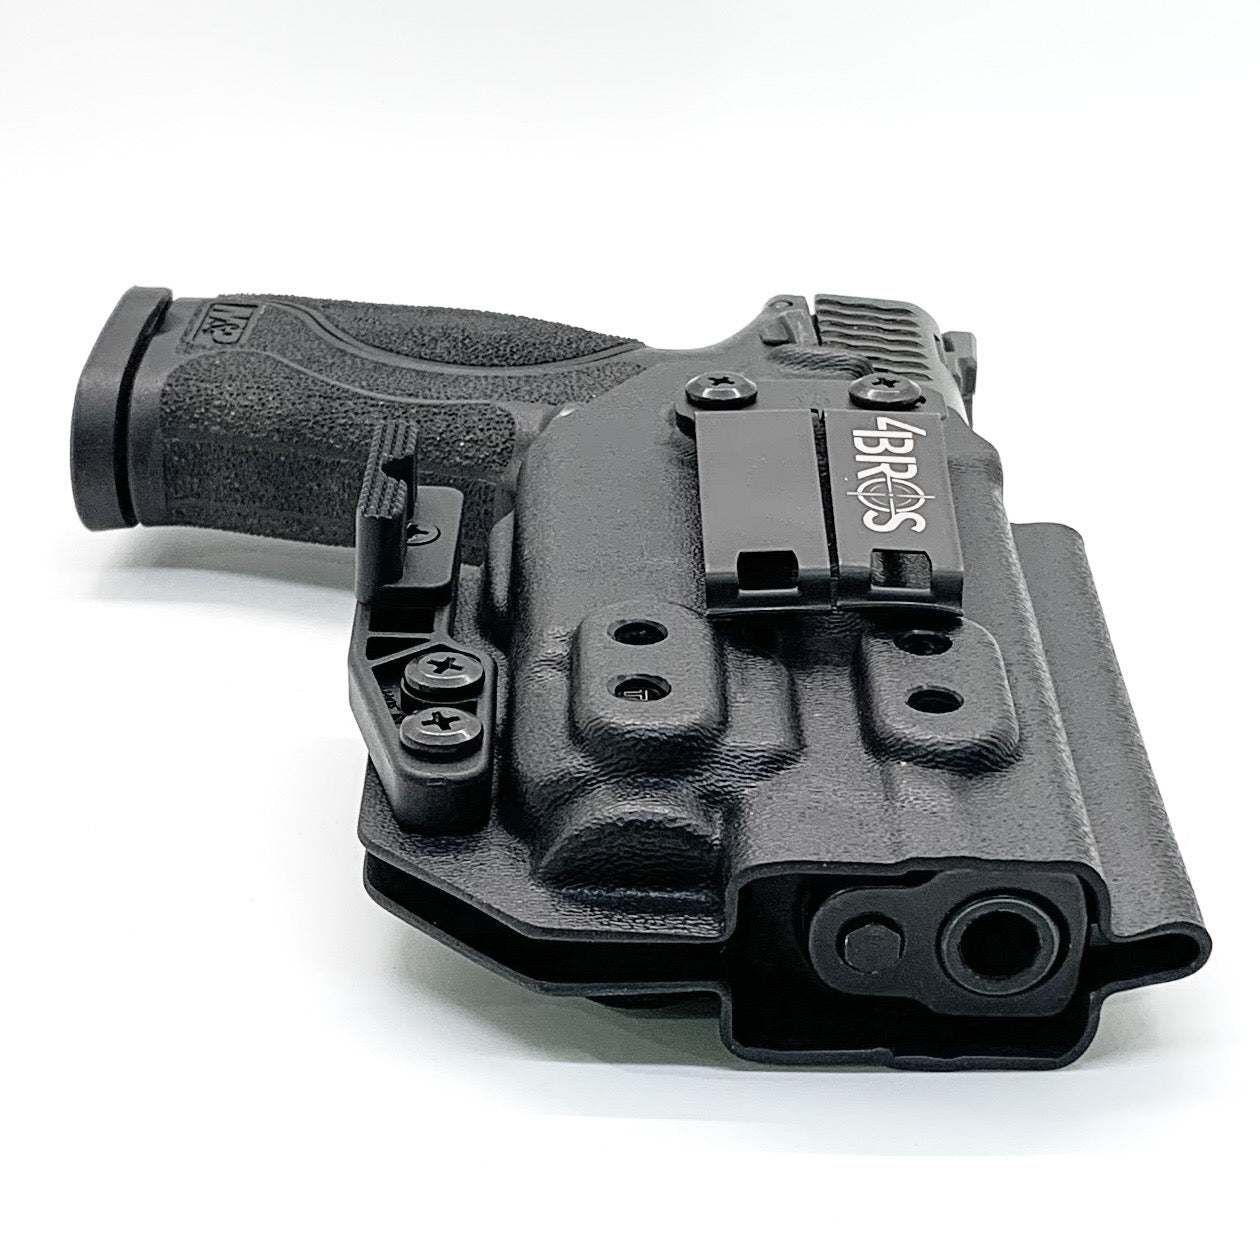 For the Best IWB AIWB Inside Waistband Kydex Taco Holster designed to fit the Smith and Wesson M&P 4" 10MM M2.0 pistol with thumb safety & TLR-7, TLR-7A or TLR-7X, shop Four Brothers Holsters.  Full sweat guard, adjustable retention, profiled for a red dot sight. Made in the USA for veterans and law enforcement. 